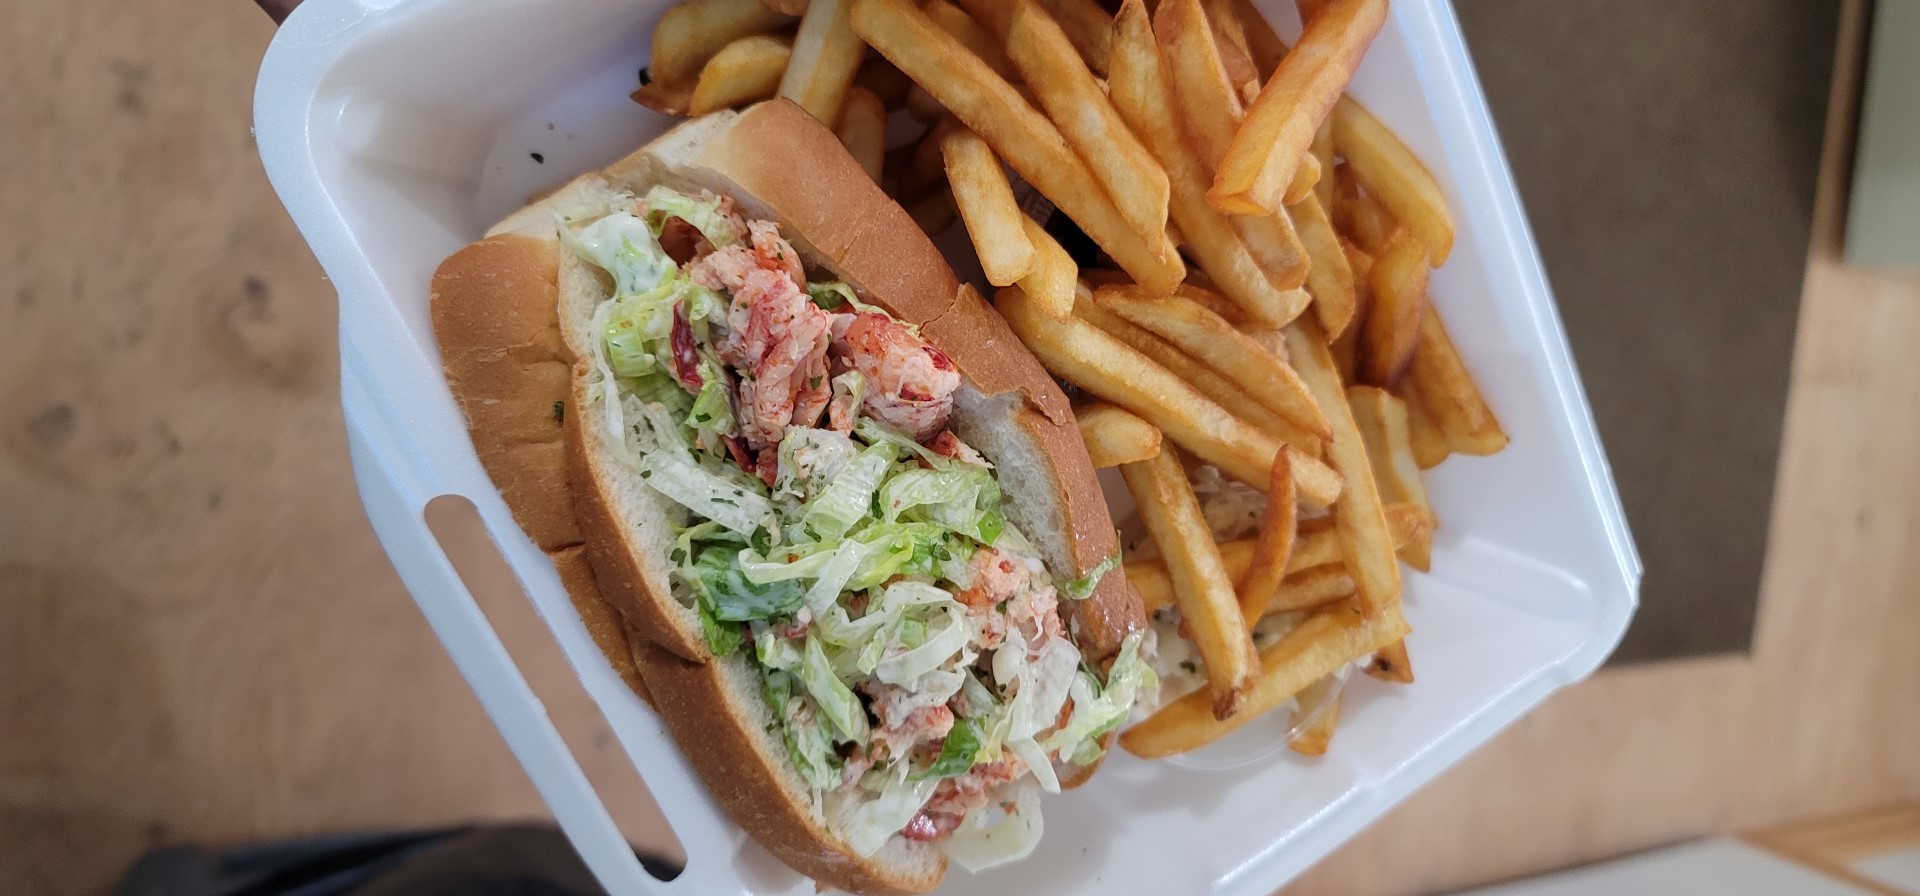 lobster roll and fries in takeout container